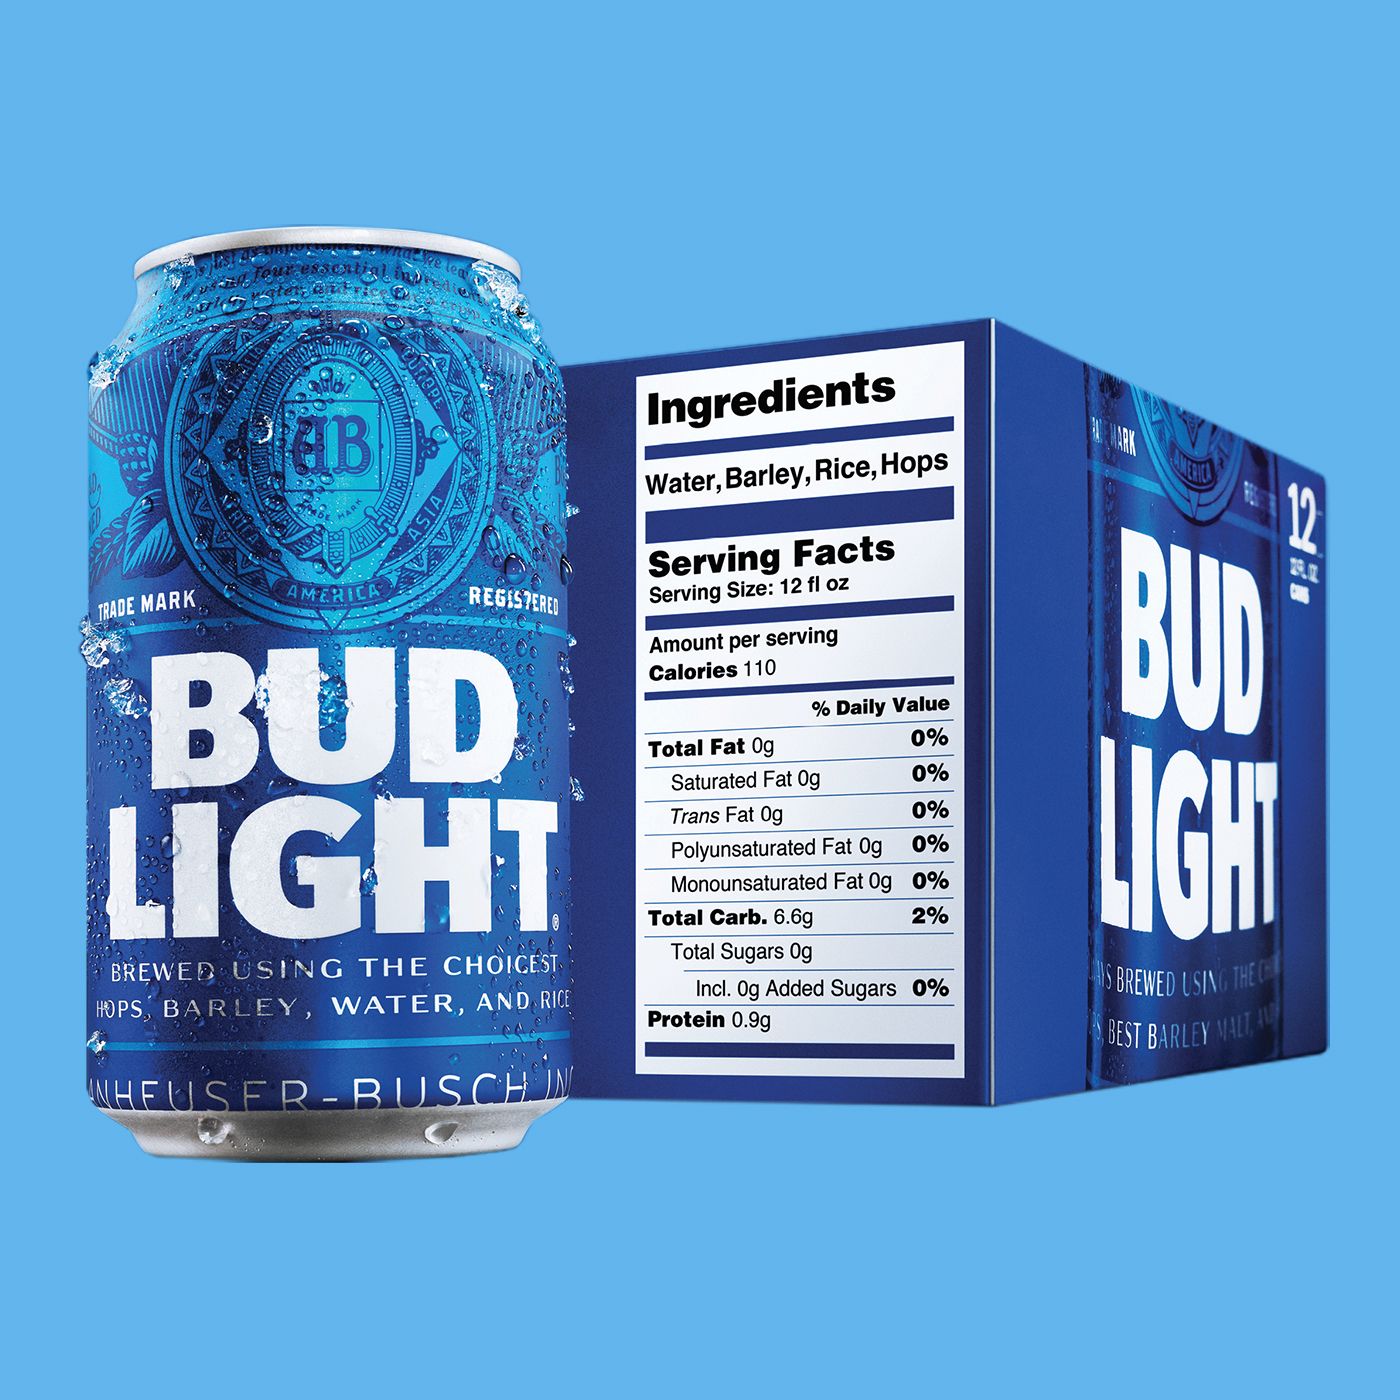 How Much Alcohol Does Bud Light Have?